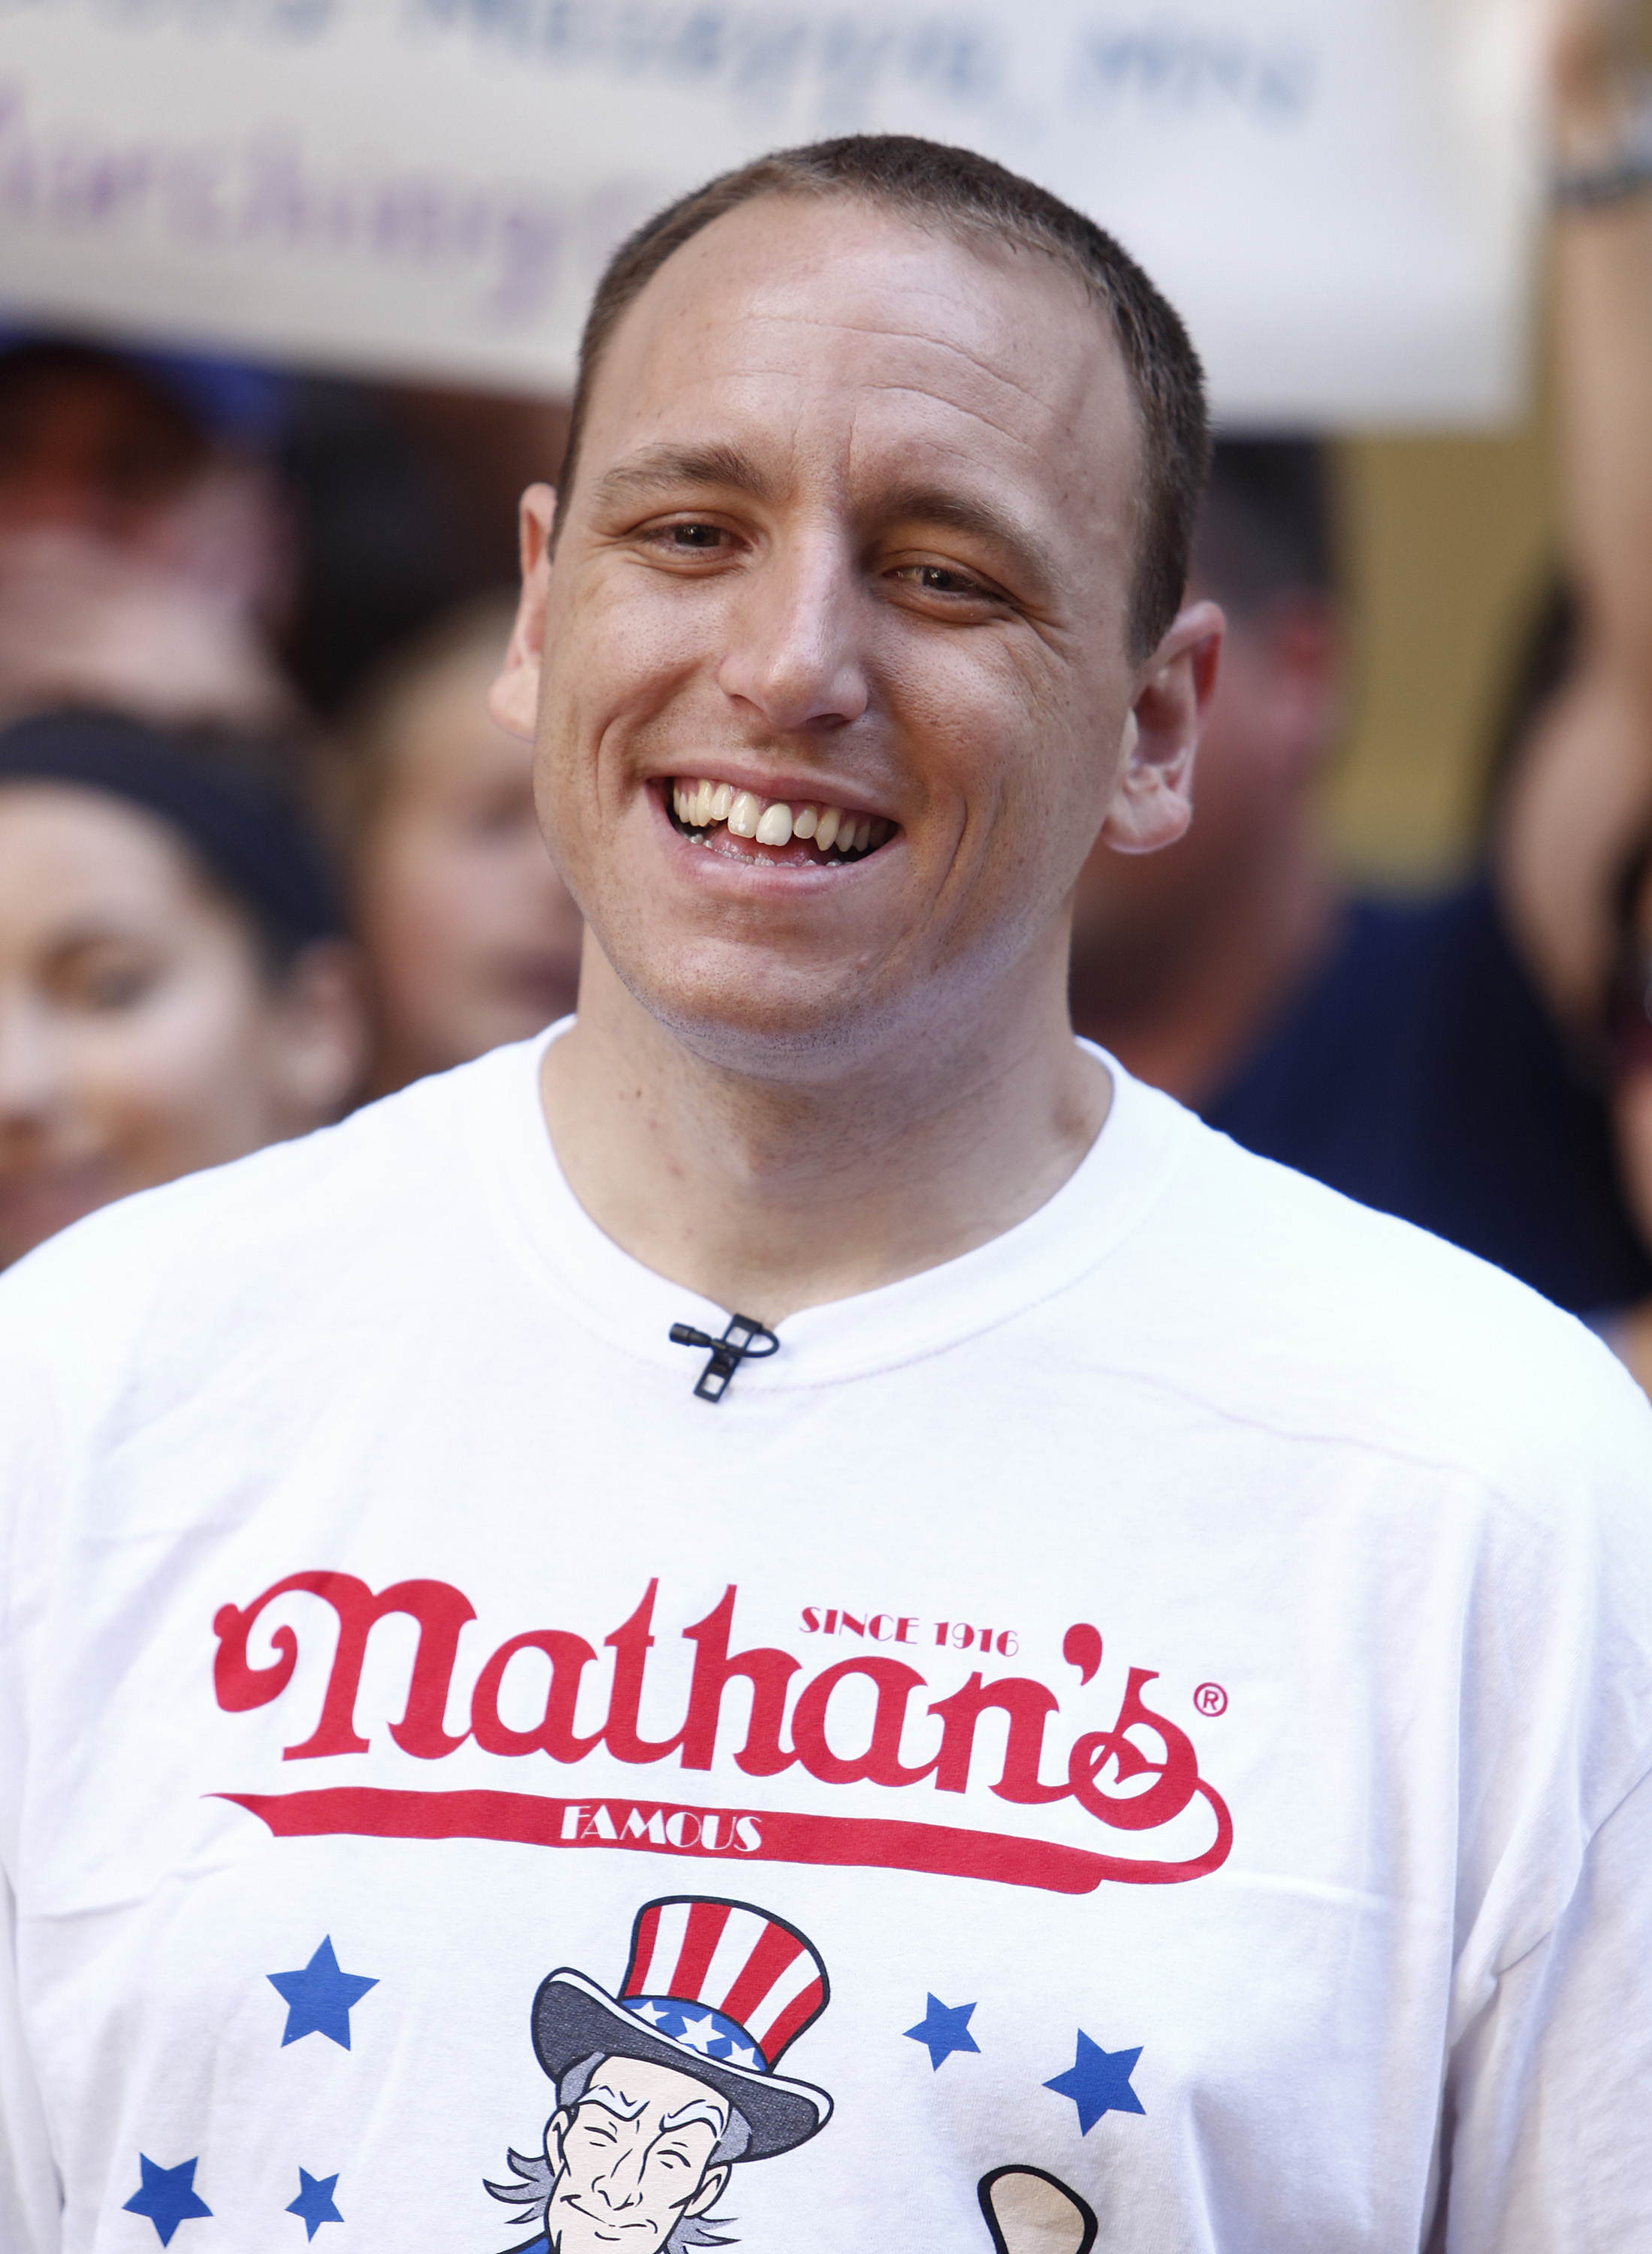 Joey Chestnut on NBC News'  Today  show on July 5, 2012.